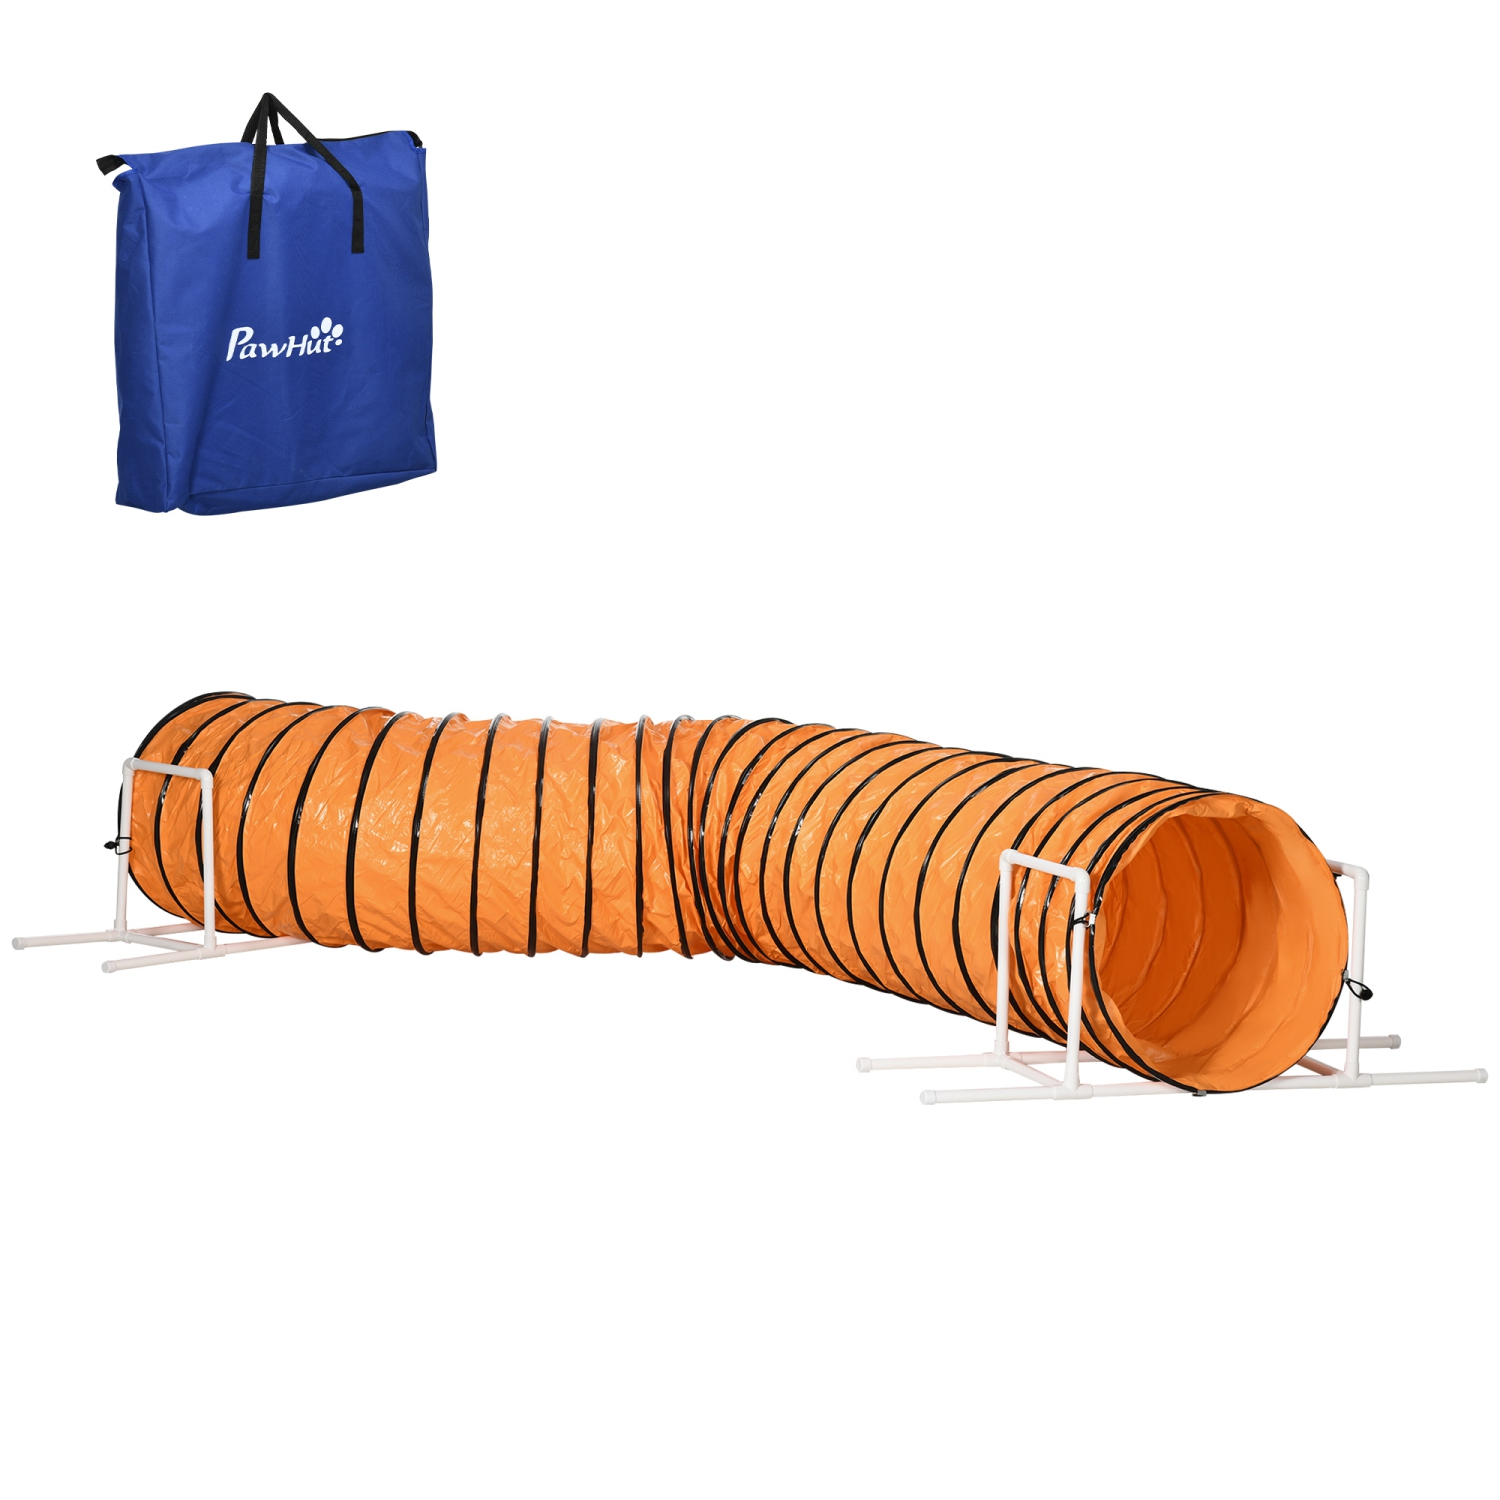 PawHut Dog Tunnel, 13 Foot Long, 24" Open Pet Agility Equipment with 2 Support Brackets, Carrying Bag, Orange